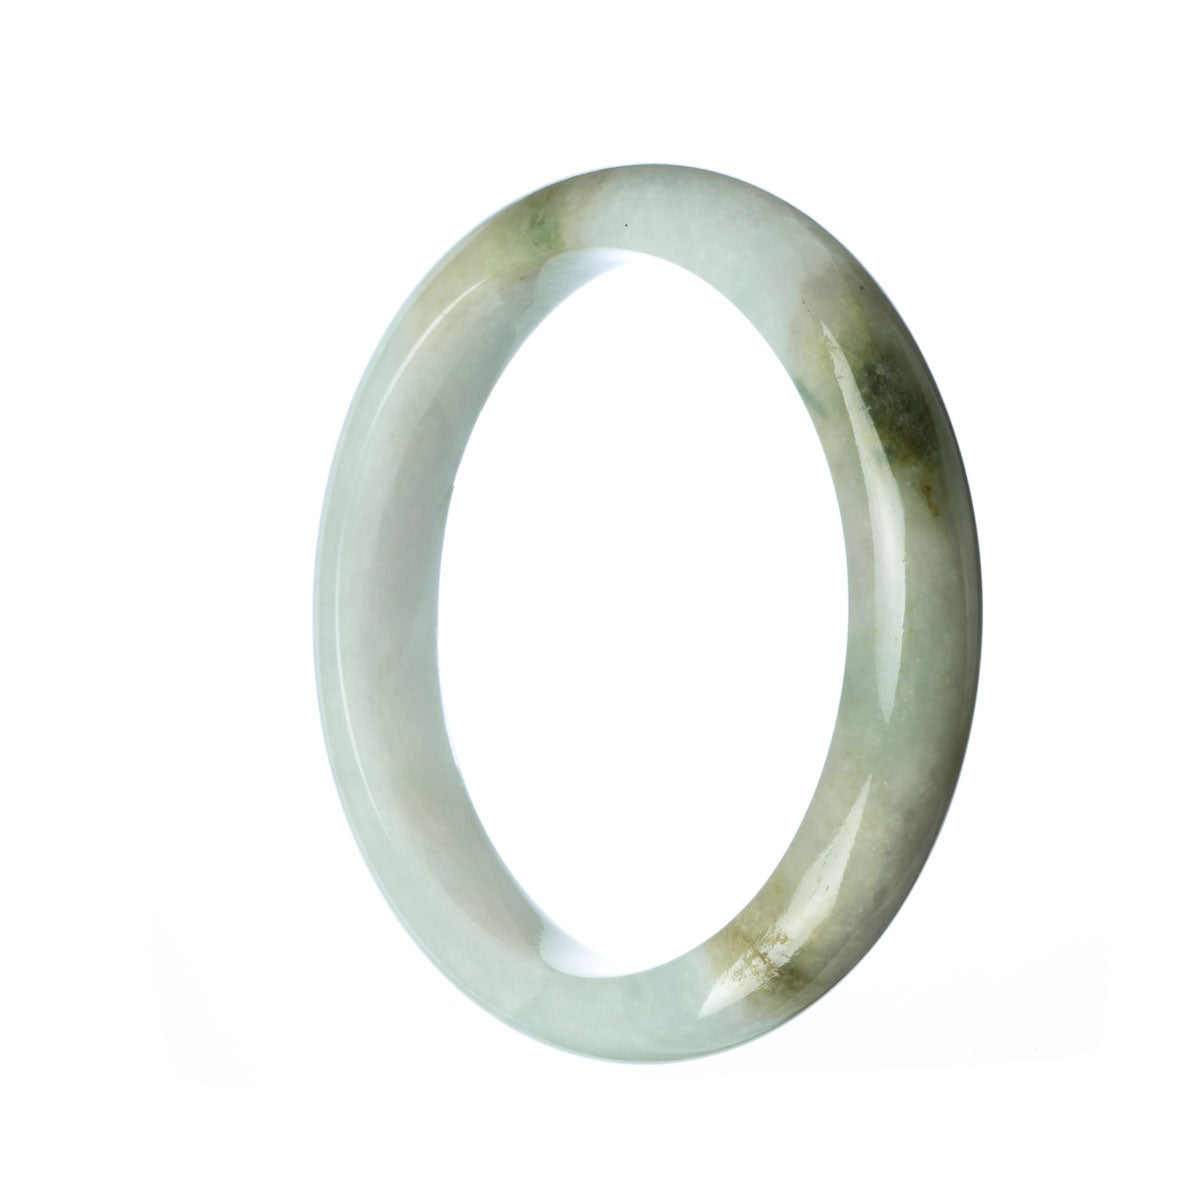 An elegant and stunning white jade bangle bracelet with a semi-round shape, measuring 59mm. Crafted with genuine Type A white jade, this MAYS bracelet is a timeless piece of jewelry.